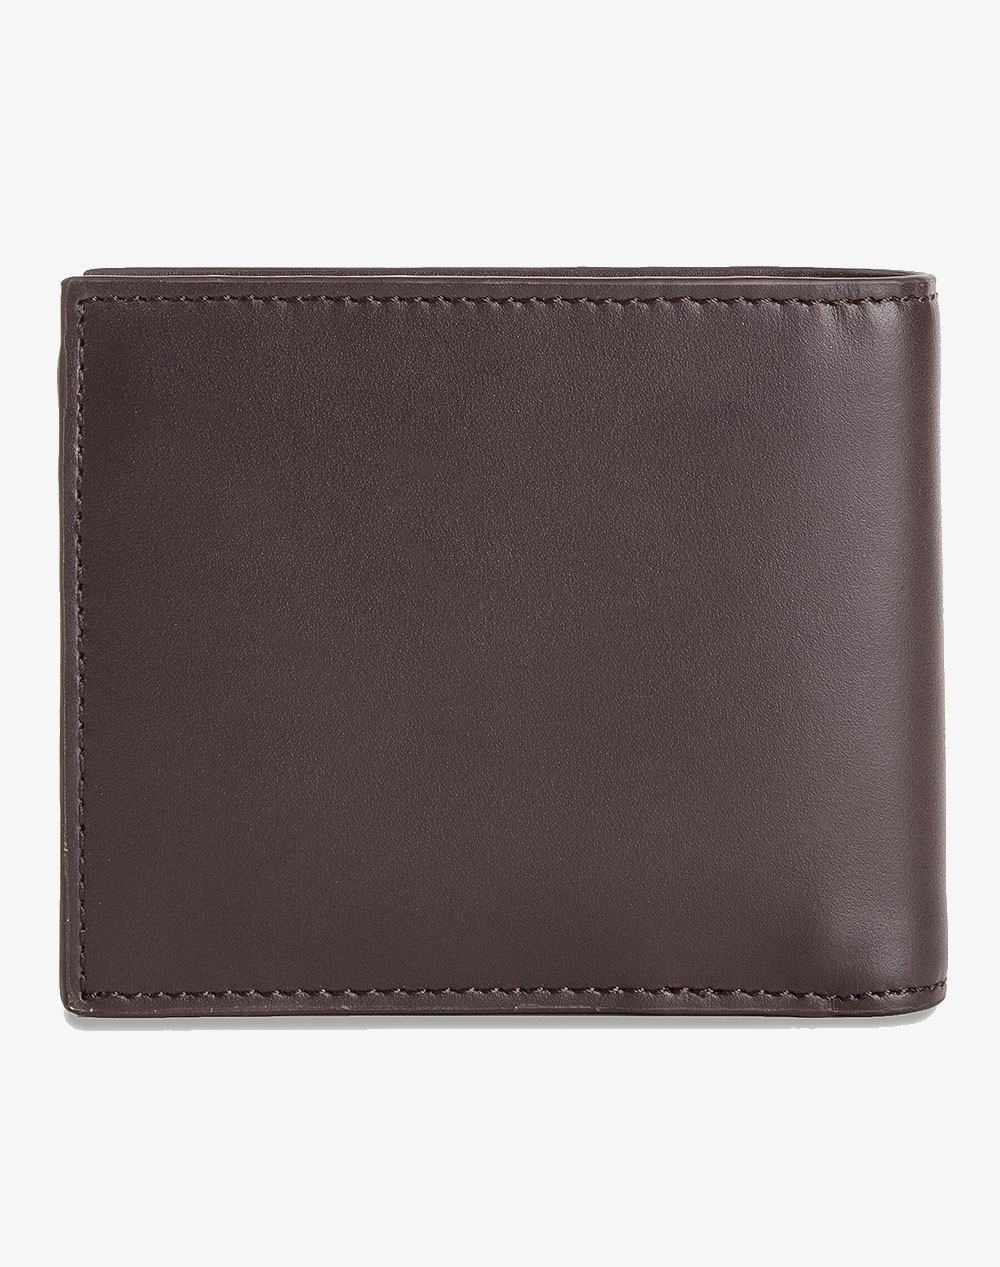 LACOSTE M BILLFOLD COIN WALLET (Dimensions: 12 x 10 x 3 cm)